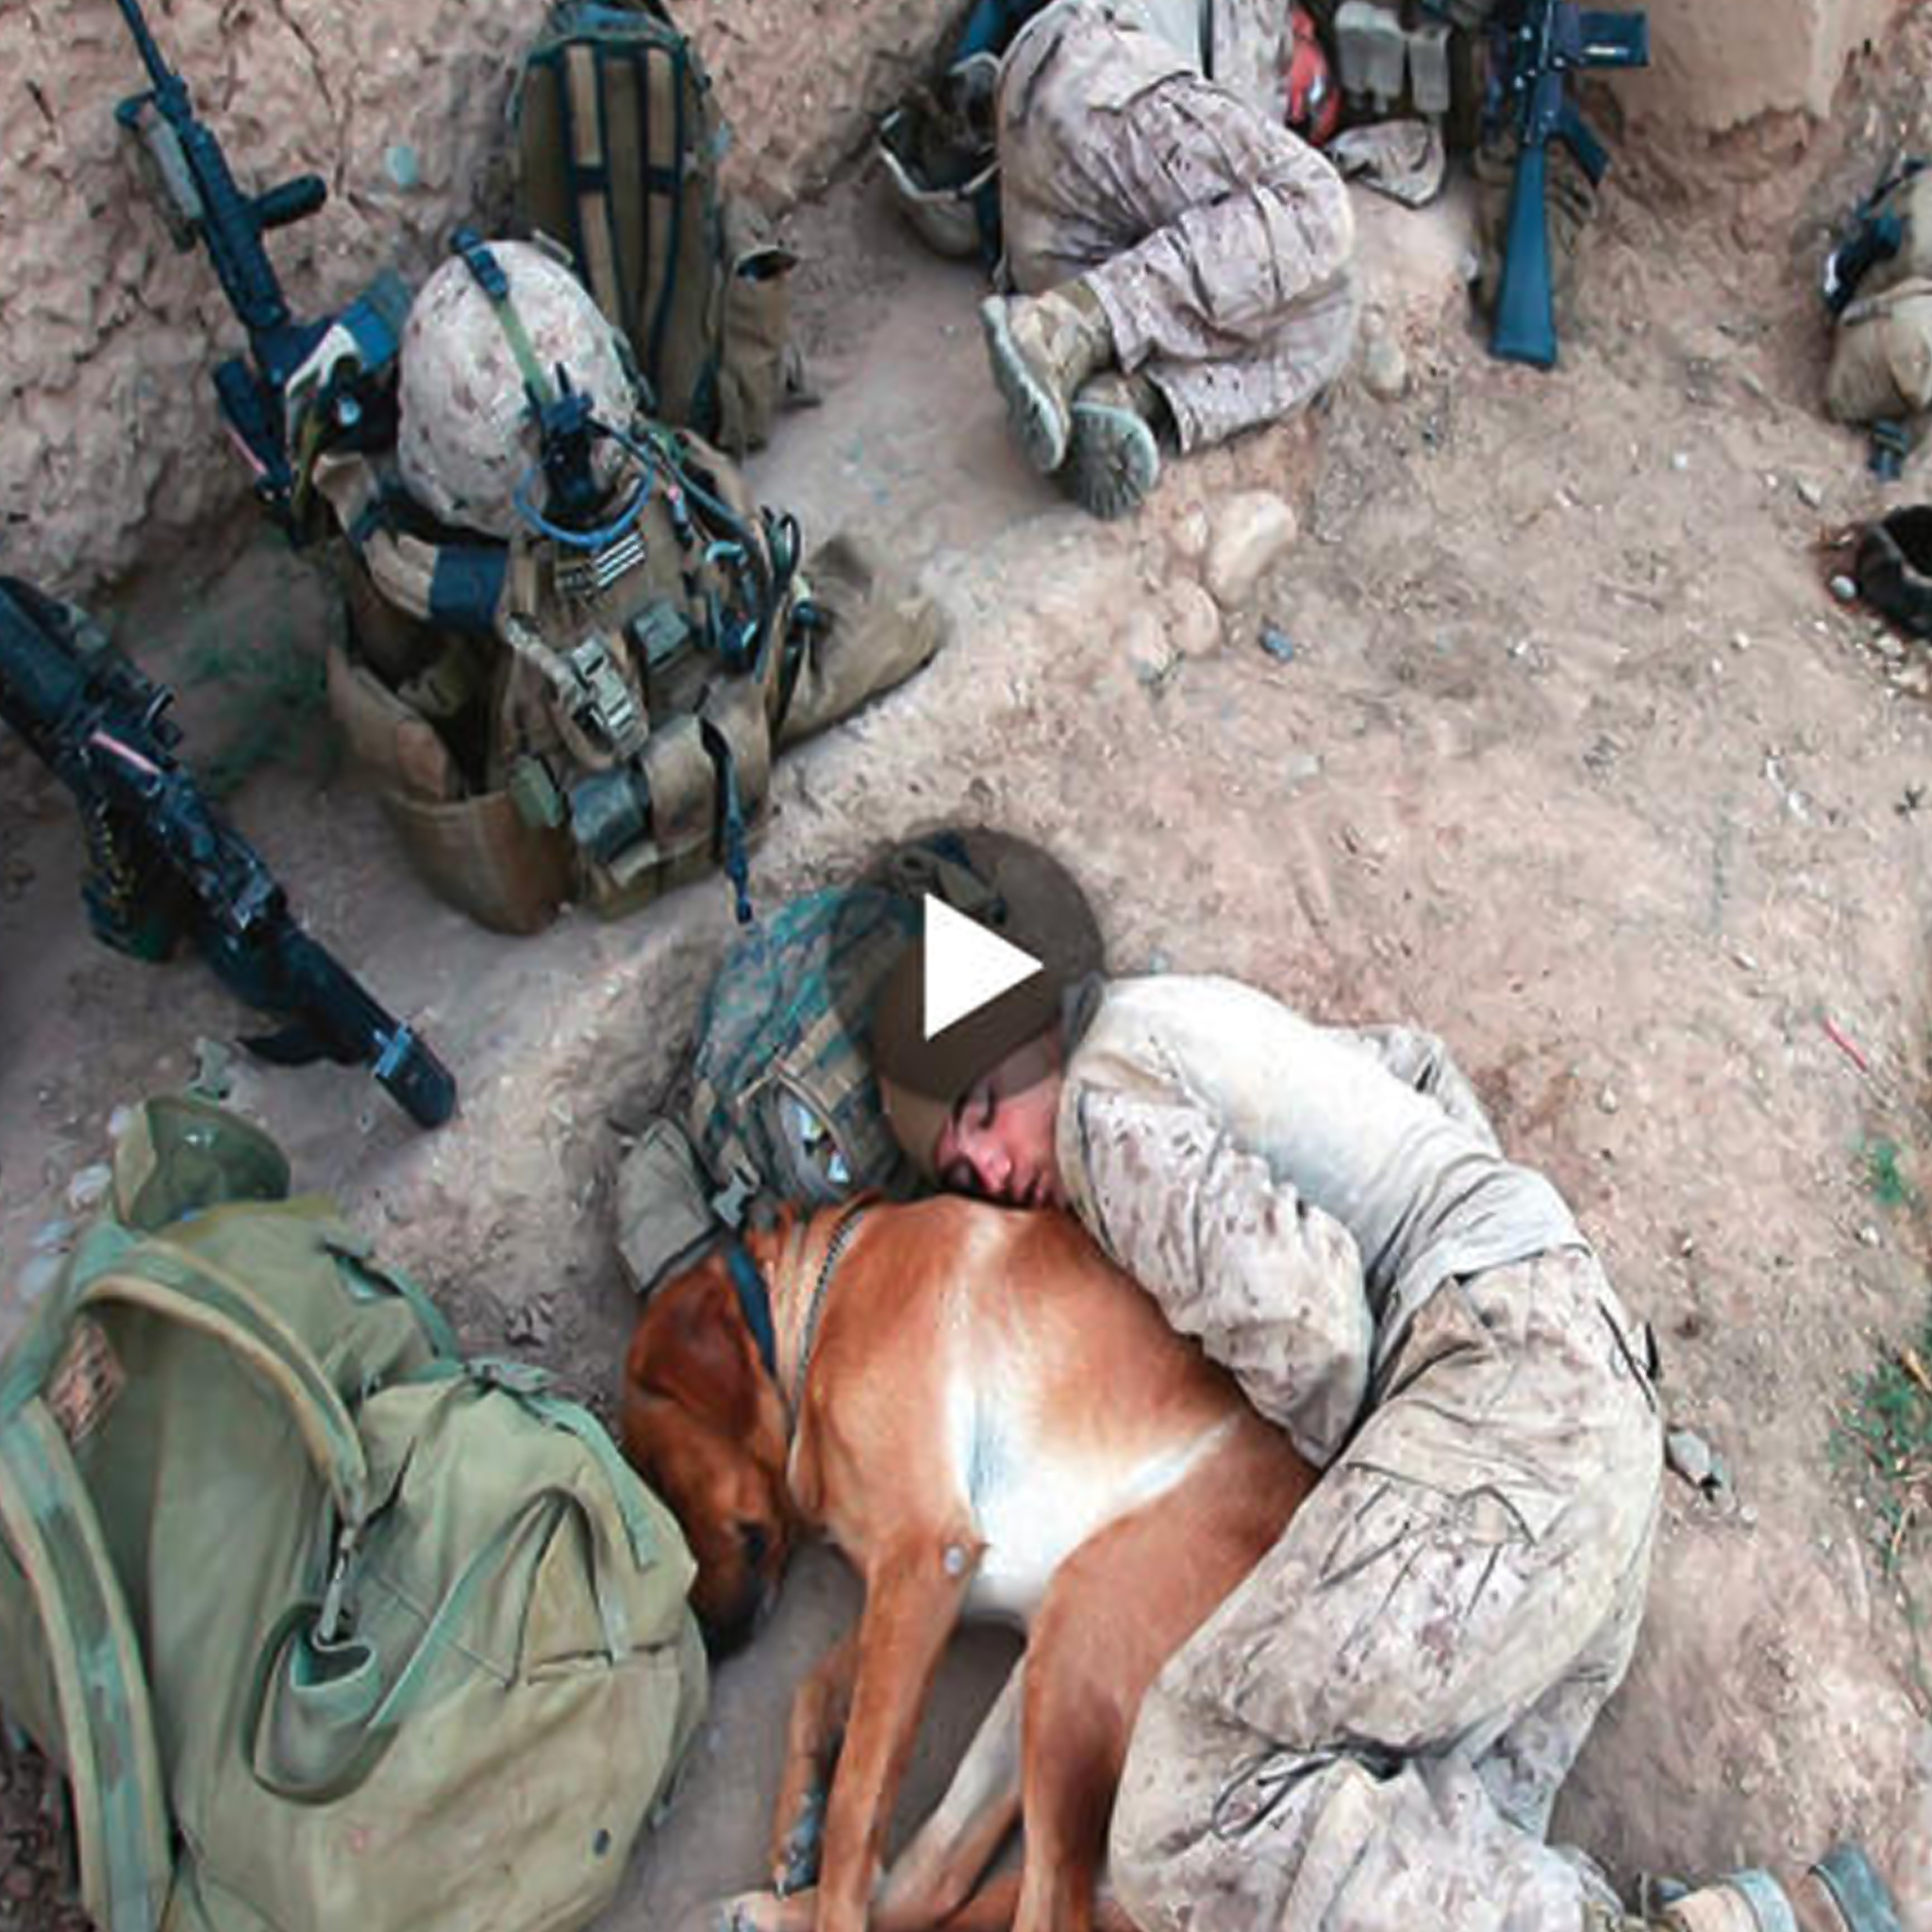 The touching tale of a devoted dog and a soldier is shown in a heartwarming nap captured on camera, illustrating the strong bond of unconditional love that warms the hearts of millions of people worldwide. ‎